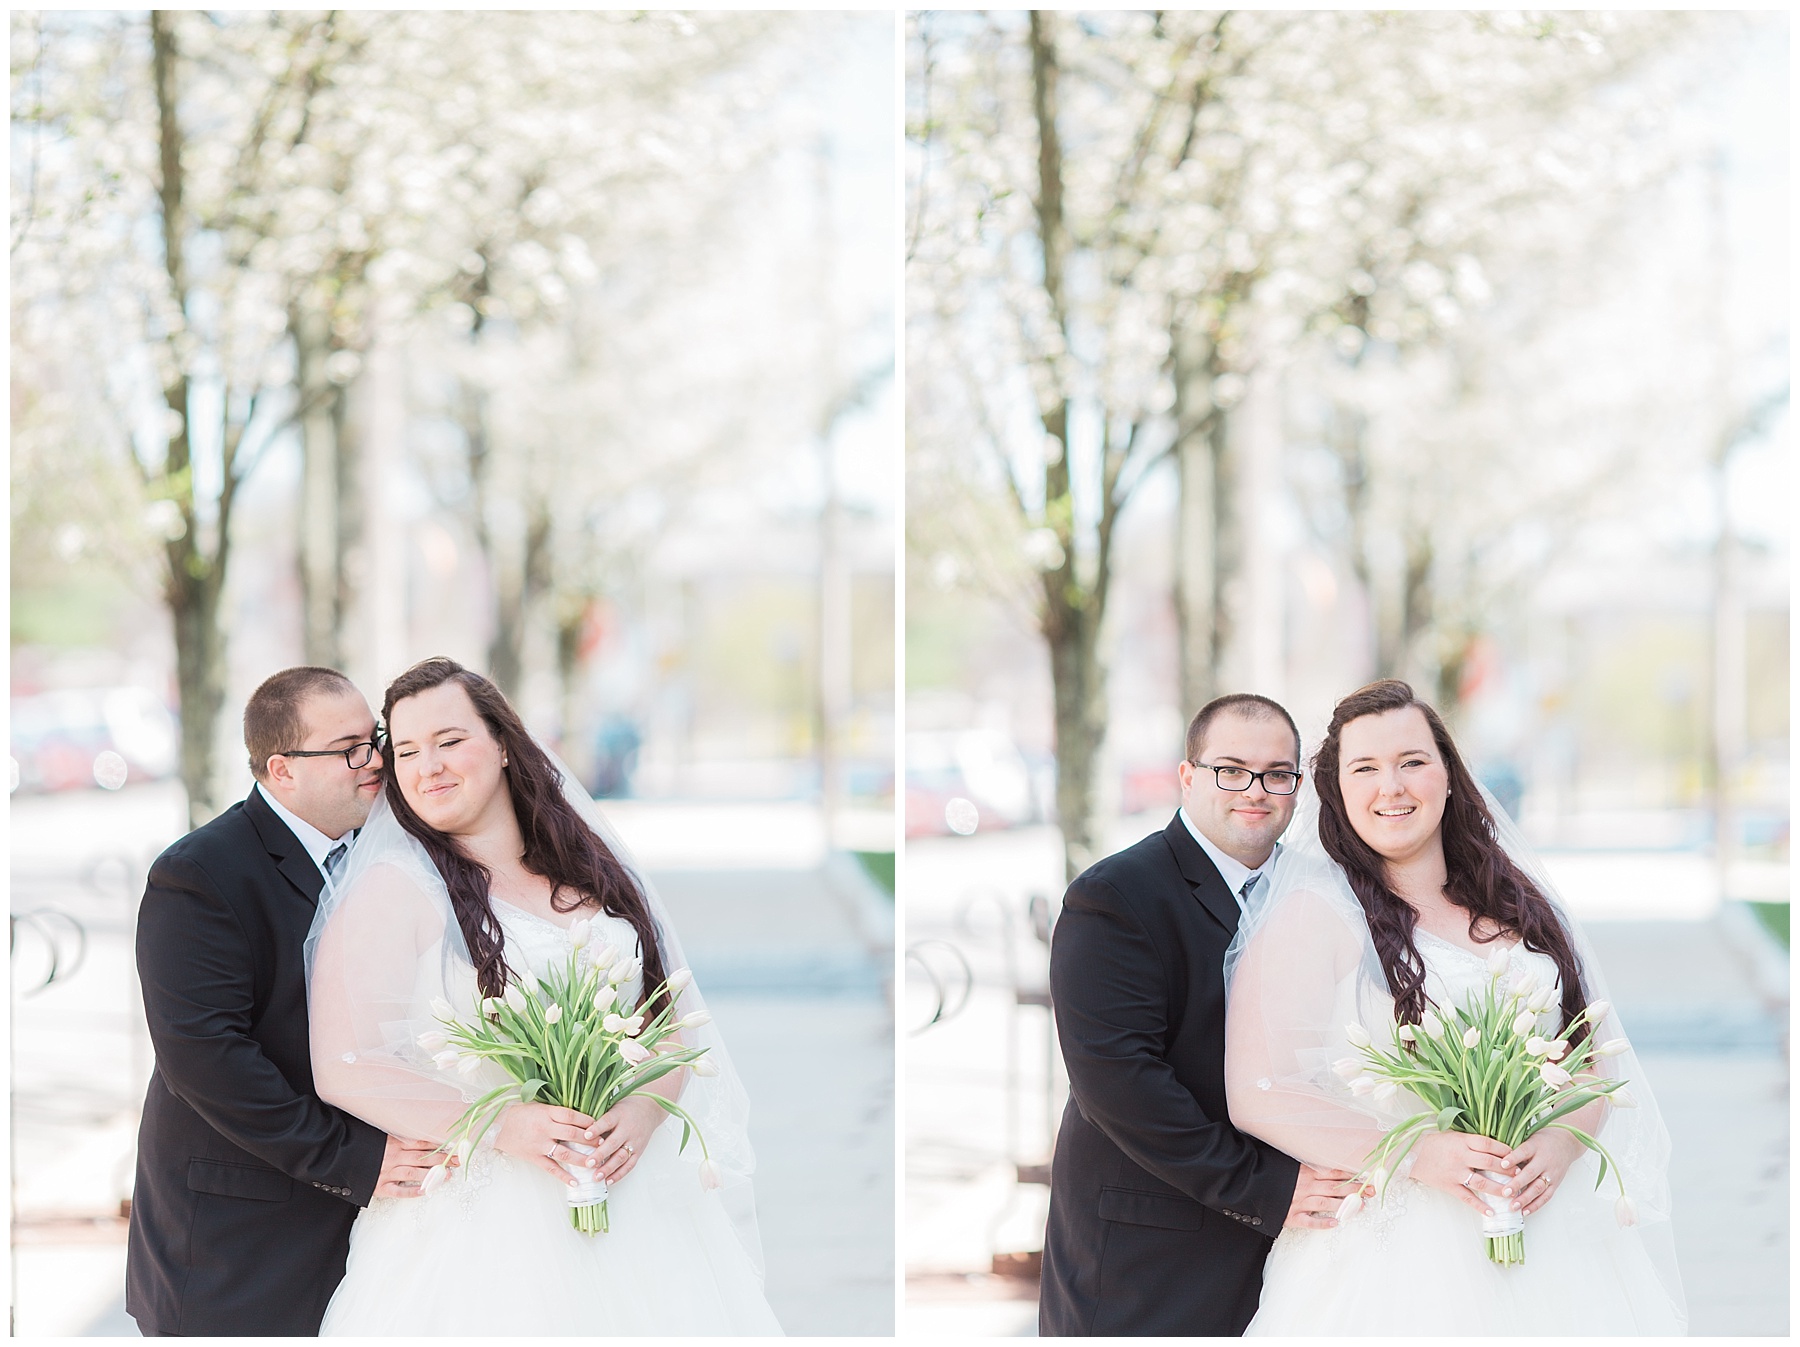 plus size couple in wedding attire taking wedding photos in downtown portland maine holding tulips